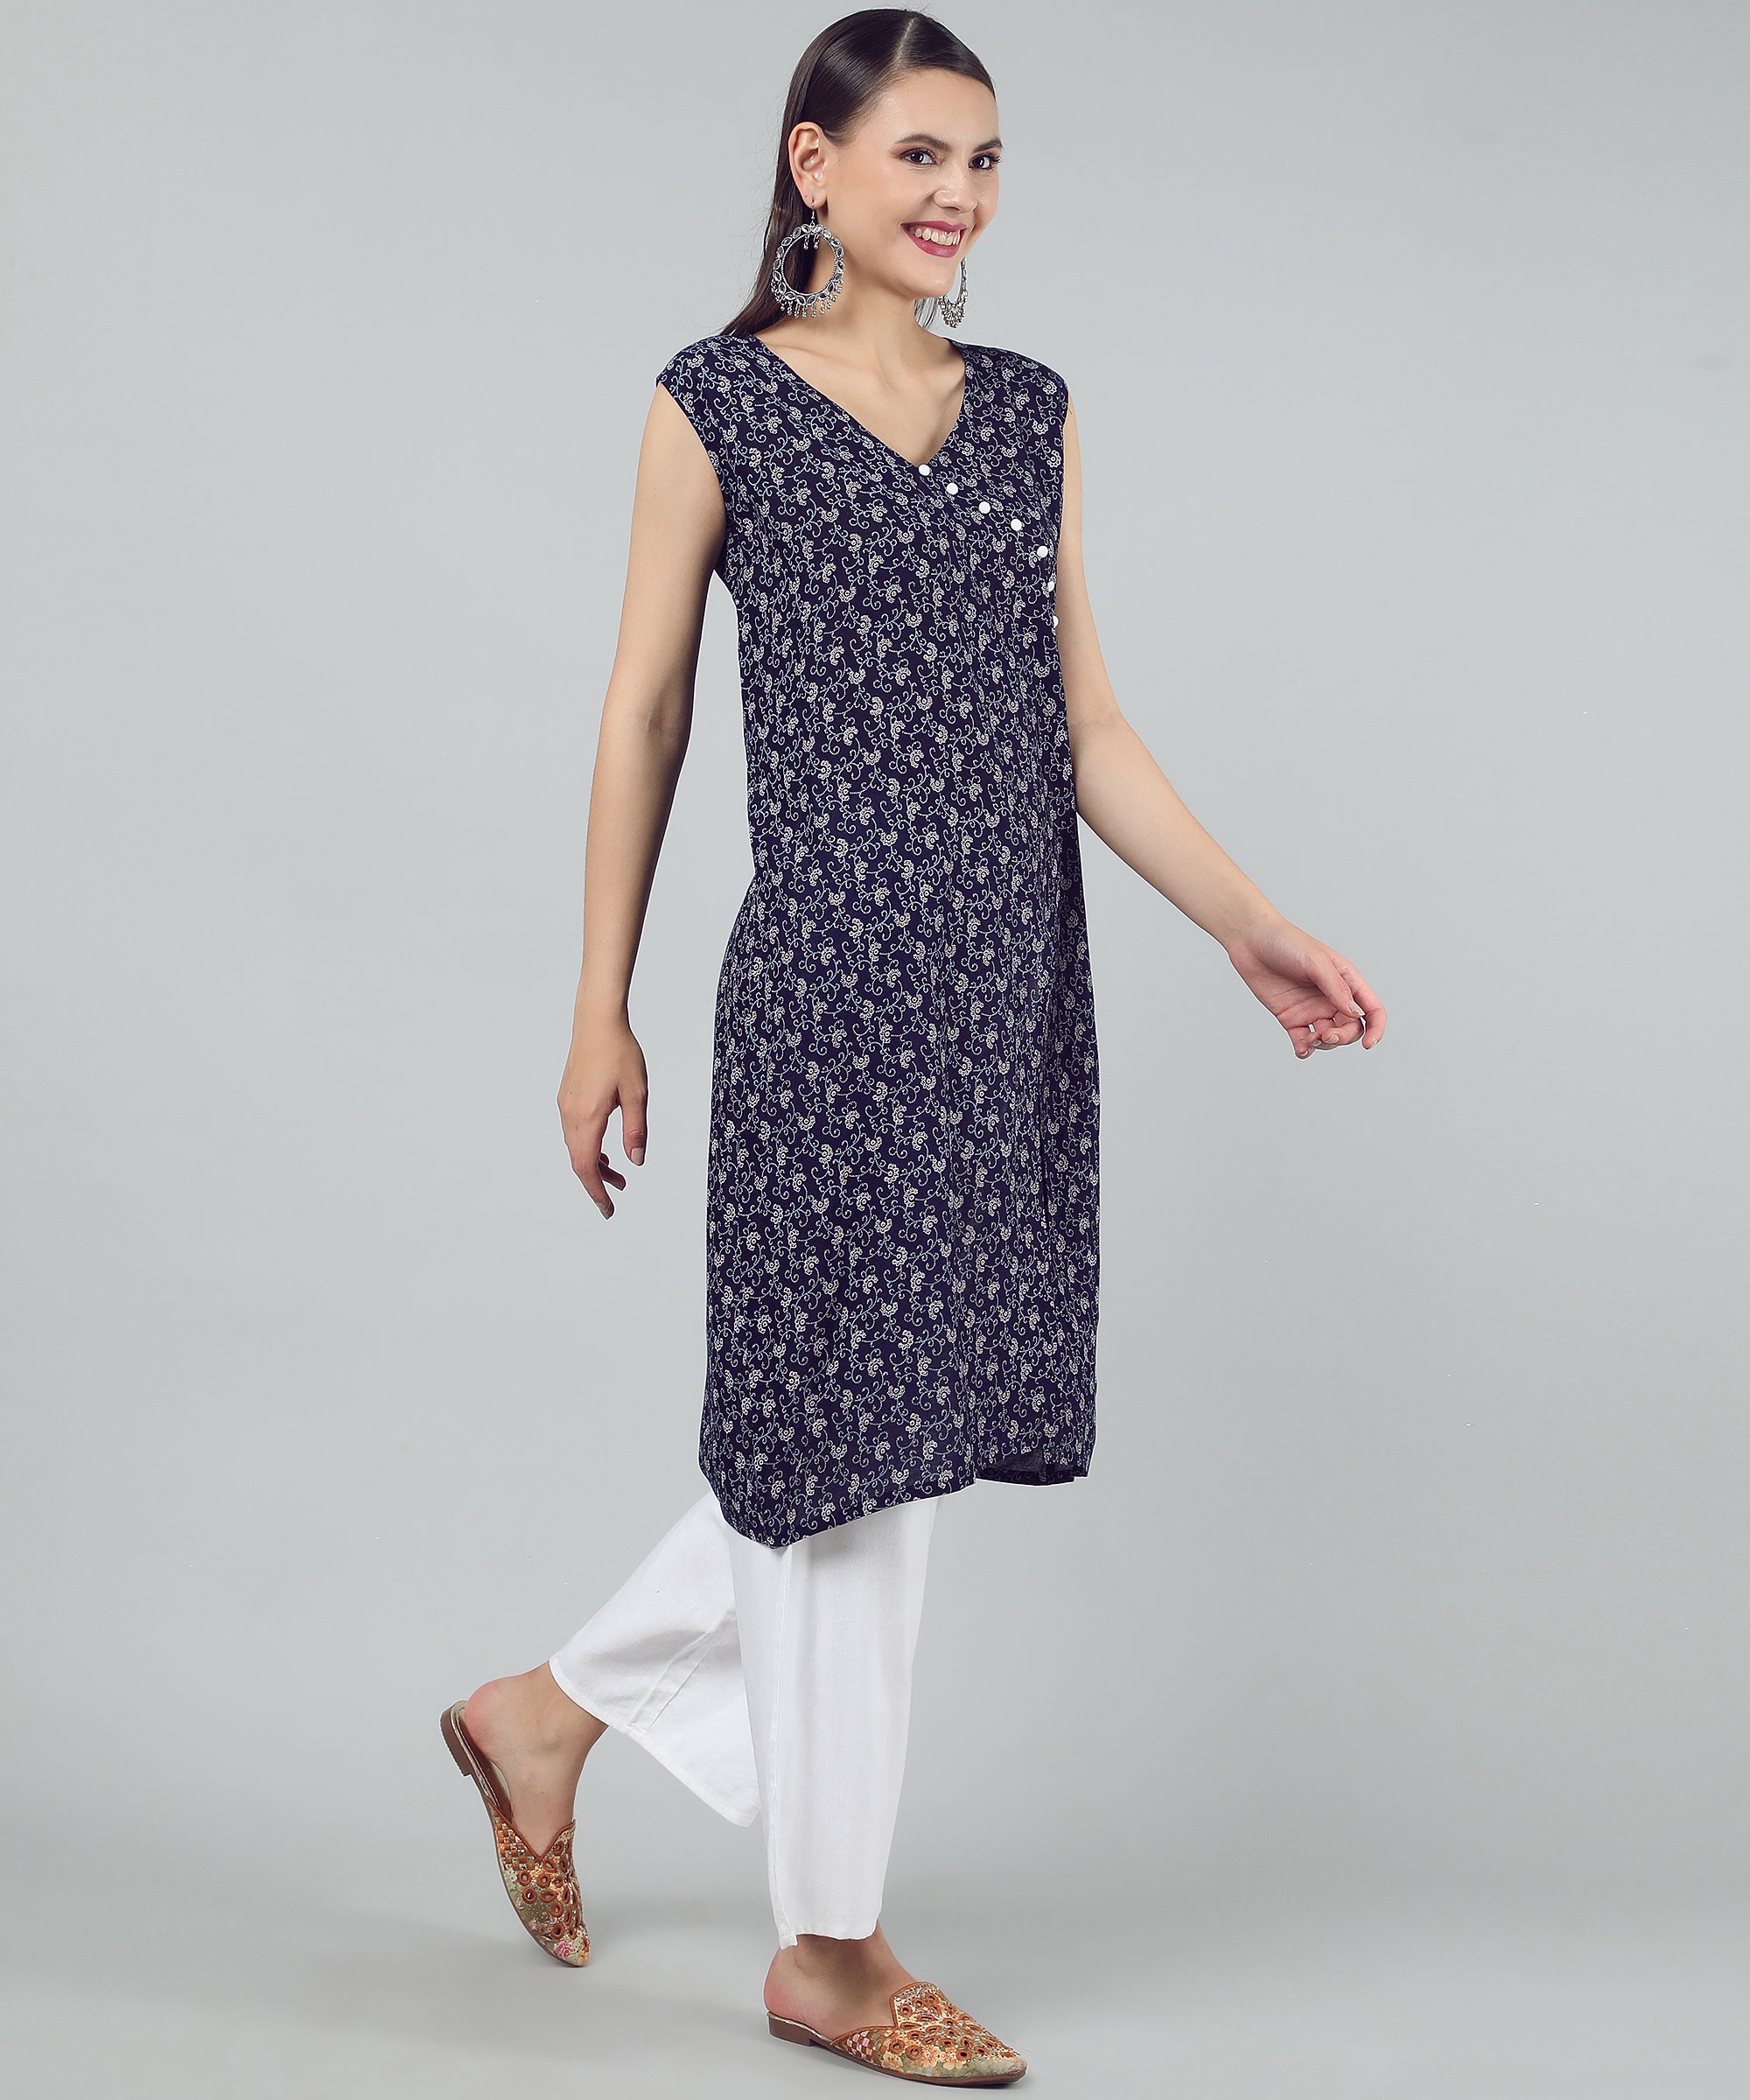 Party Wear Long Flair Gown with Center Slit and Frills. Kurtis